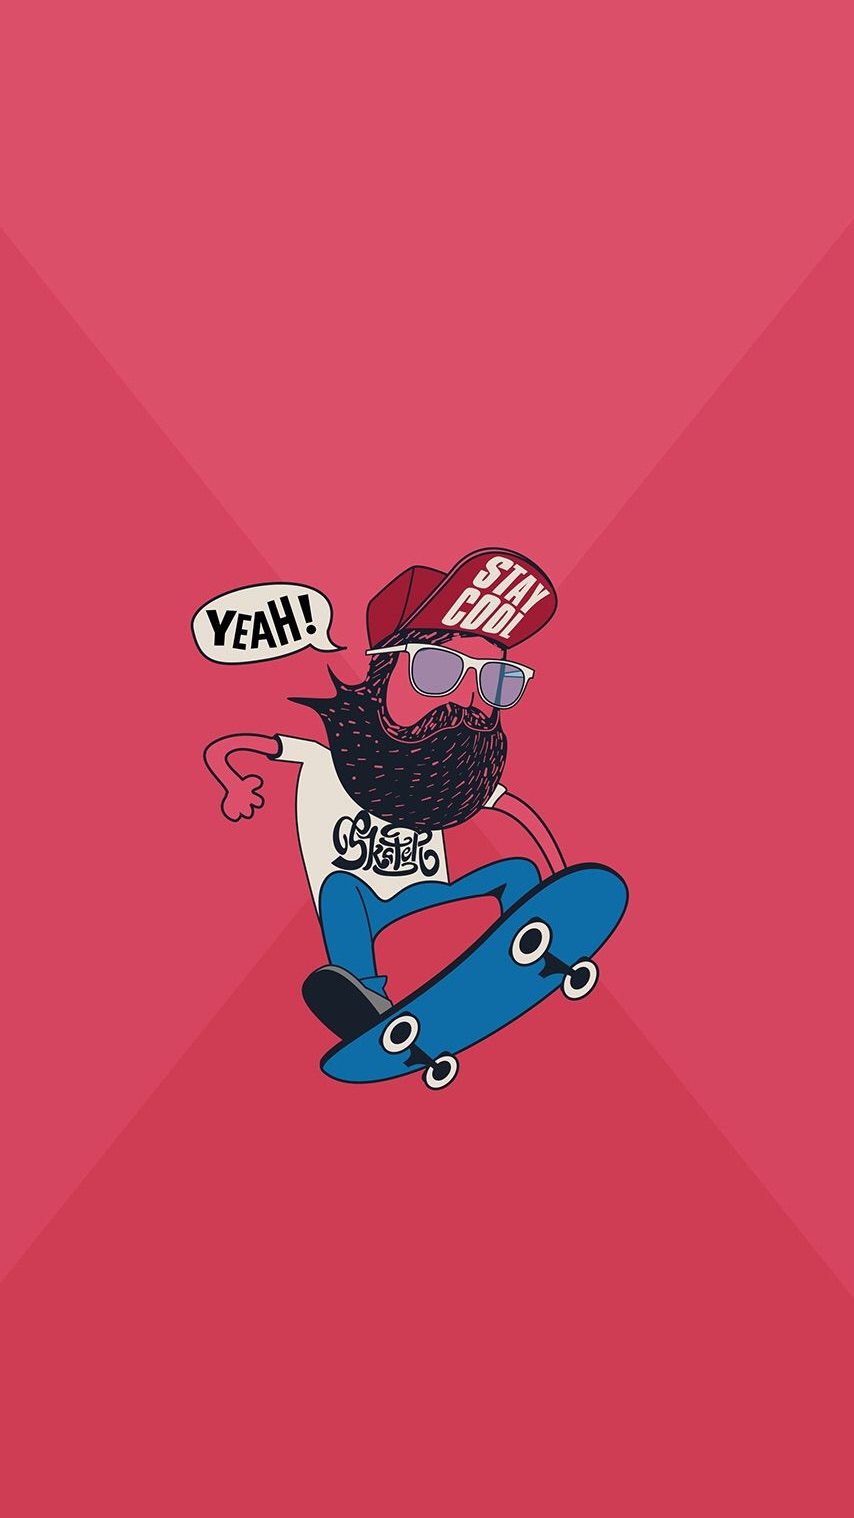 Cool Dude Skateboarding Iphone Wallpaper - Cool Cartoon Phone Wallpaper Skatebording , HD Wallpaper & Backgrounds